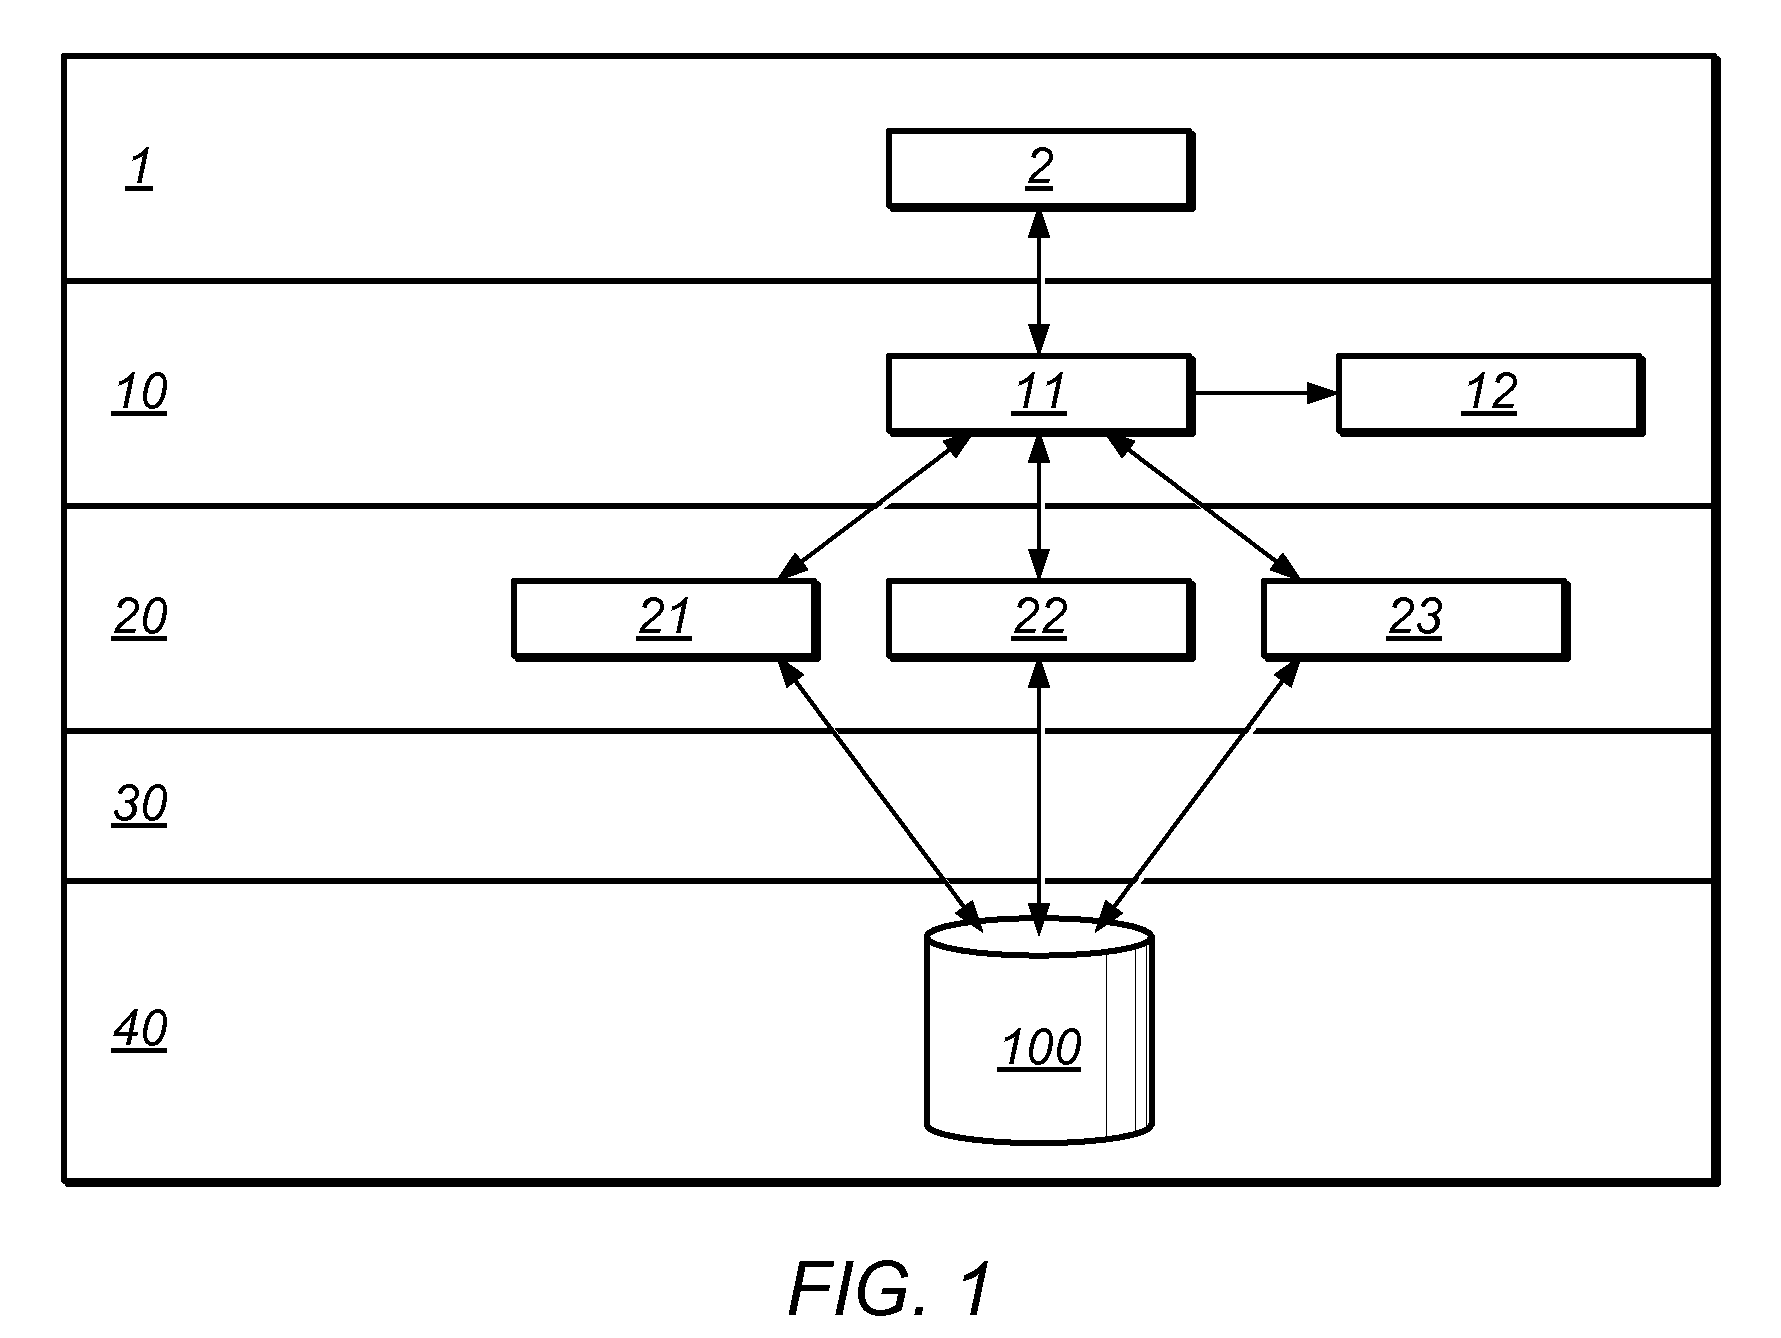 System and Method for Accessing Files in a Physical Data Storage